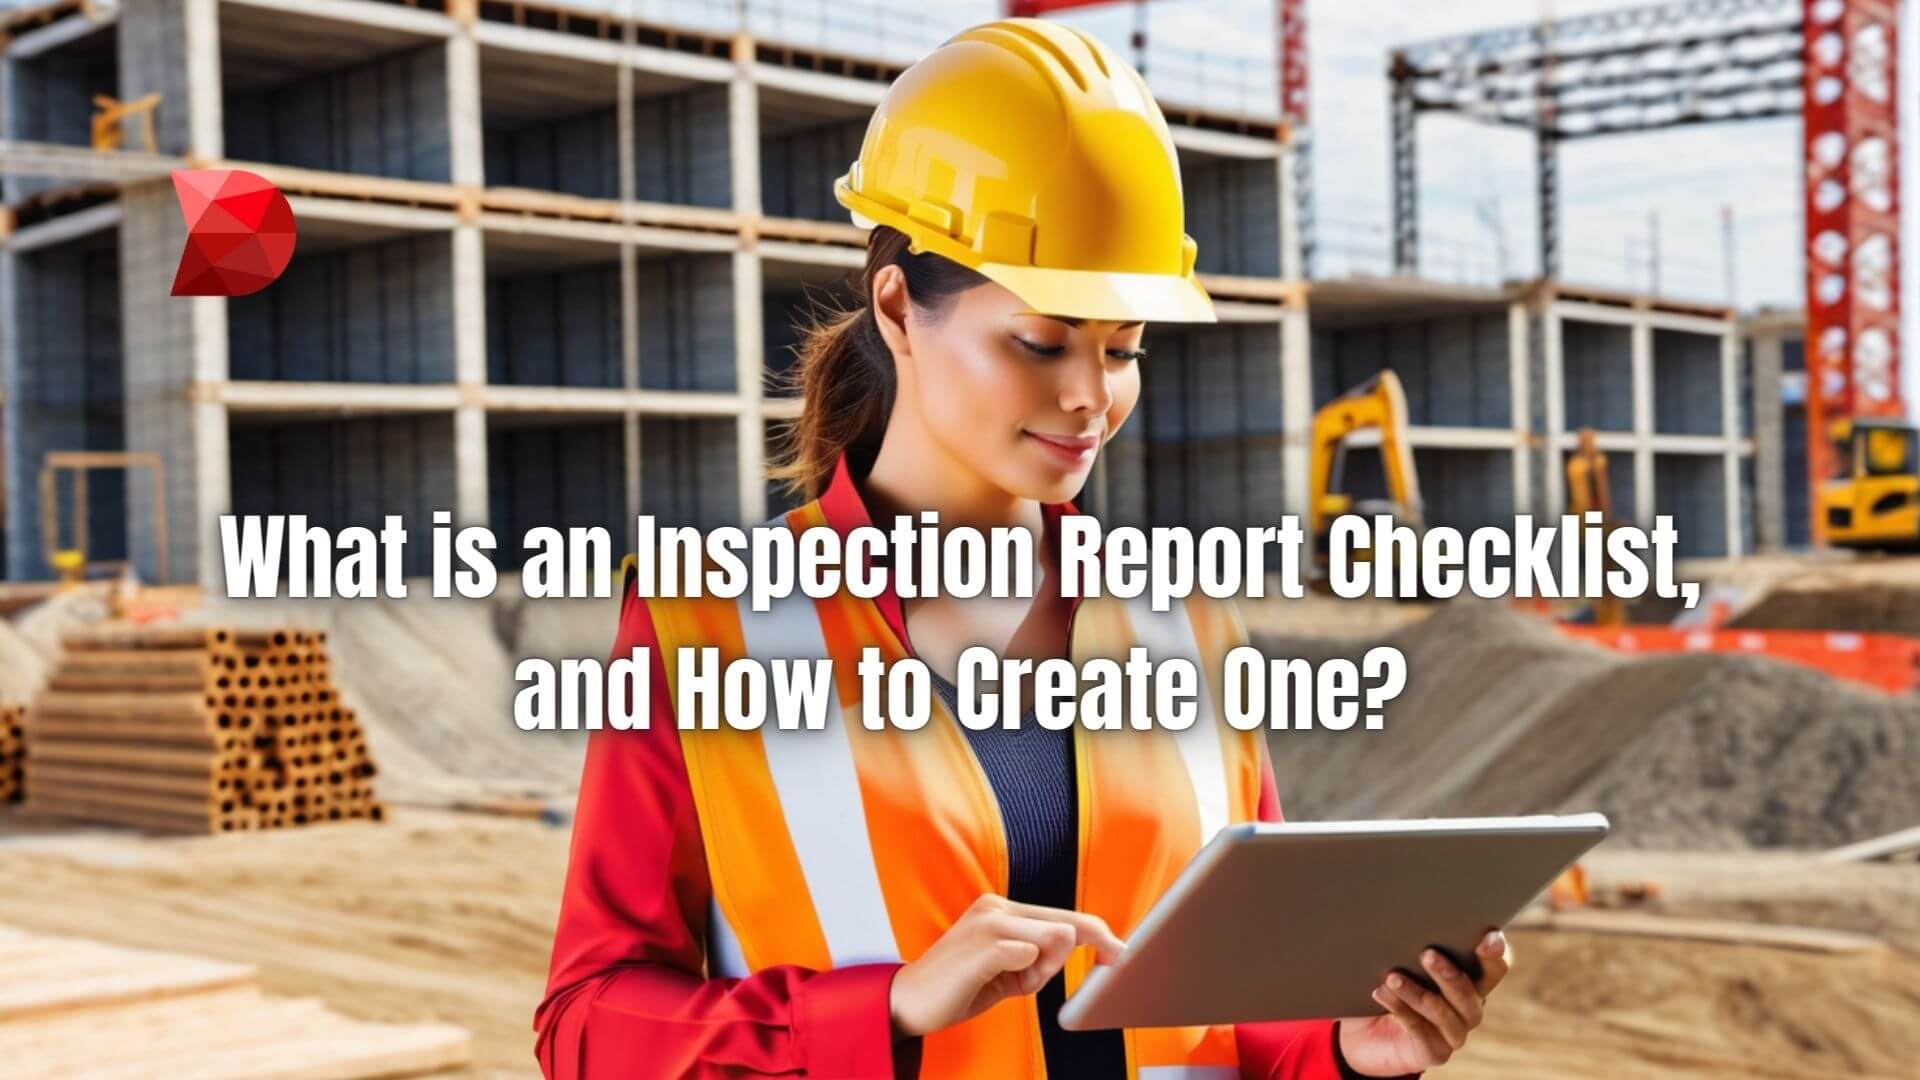 An inspection report checklist is used to assess and document the condition, quality, and compliance of products and facilities. Learn more!